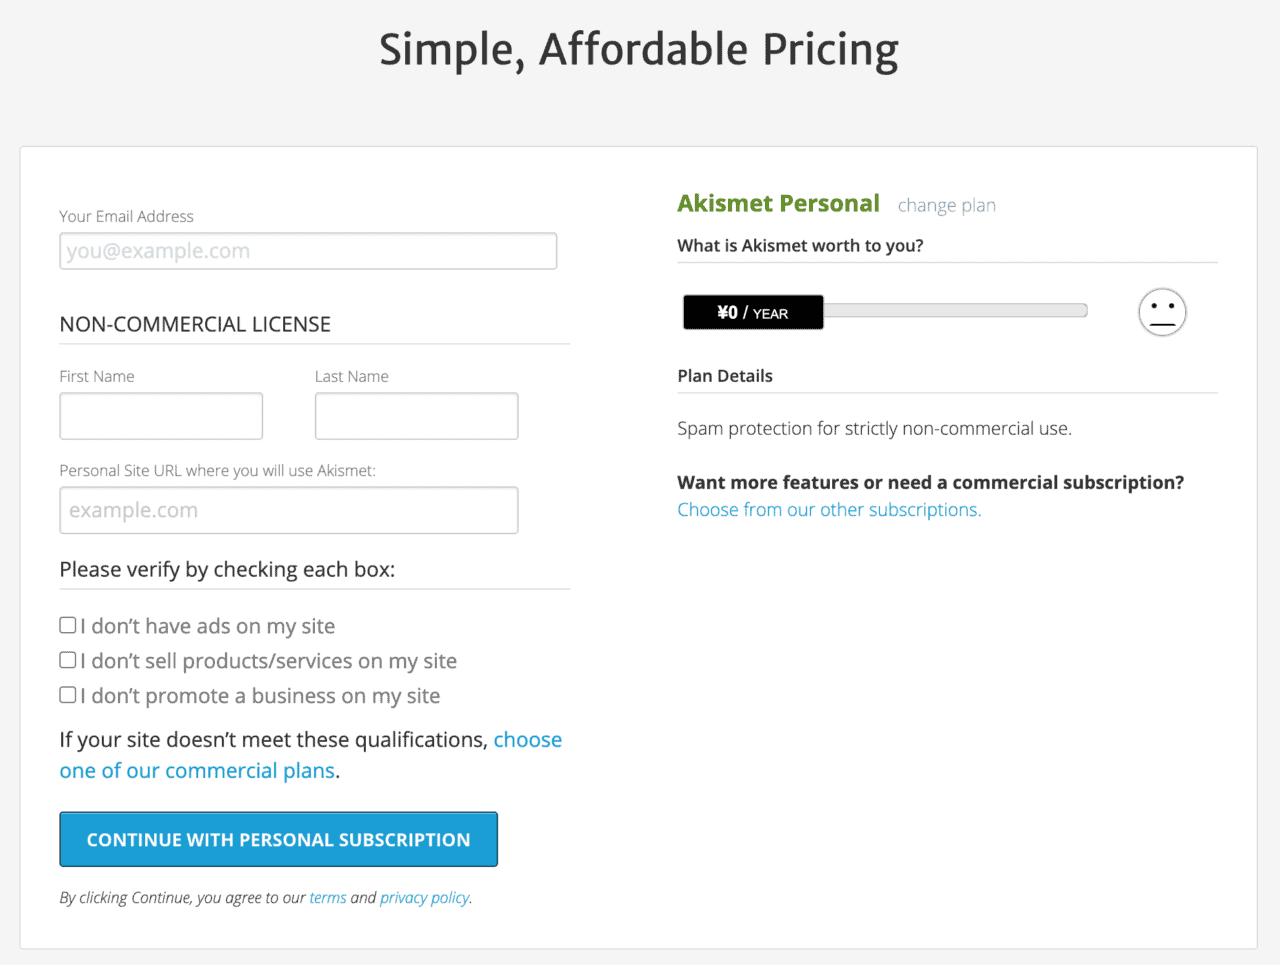 akismet-Simple, Affordable Pricing-after